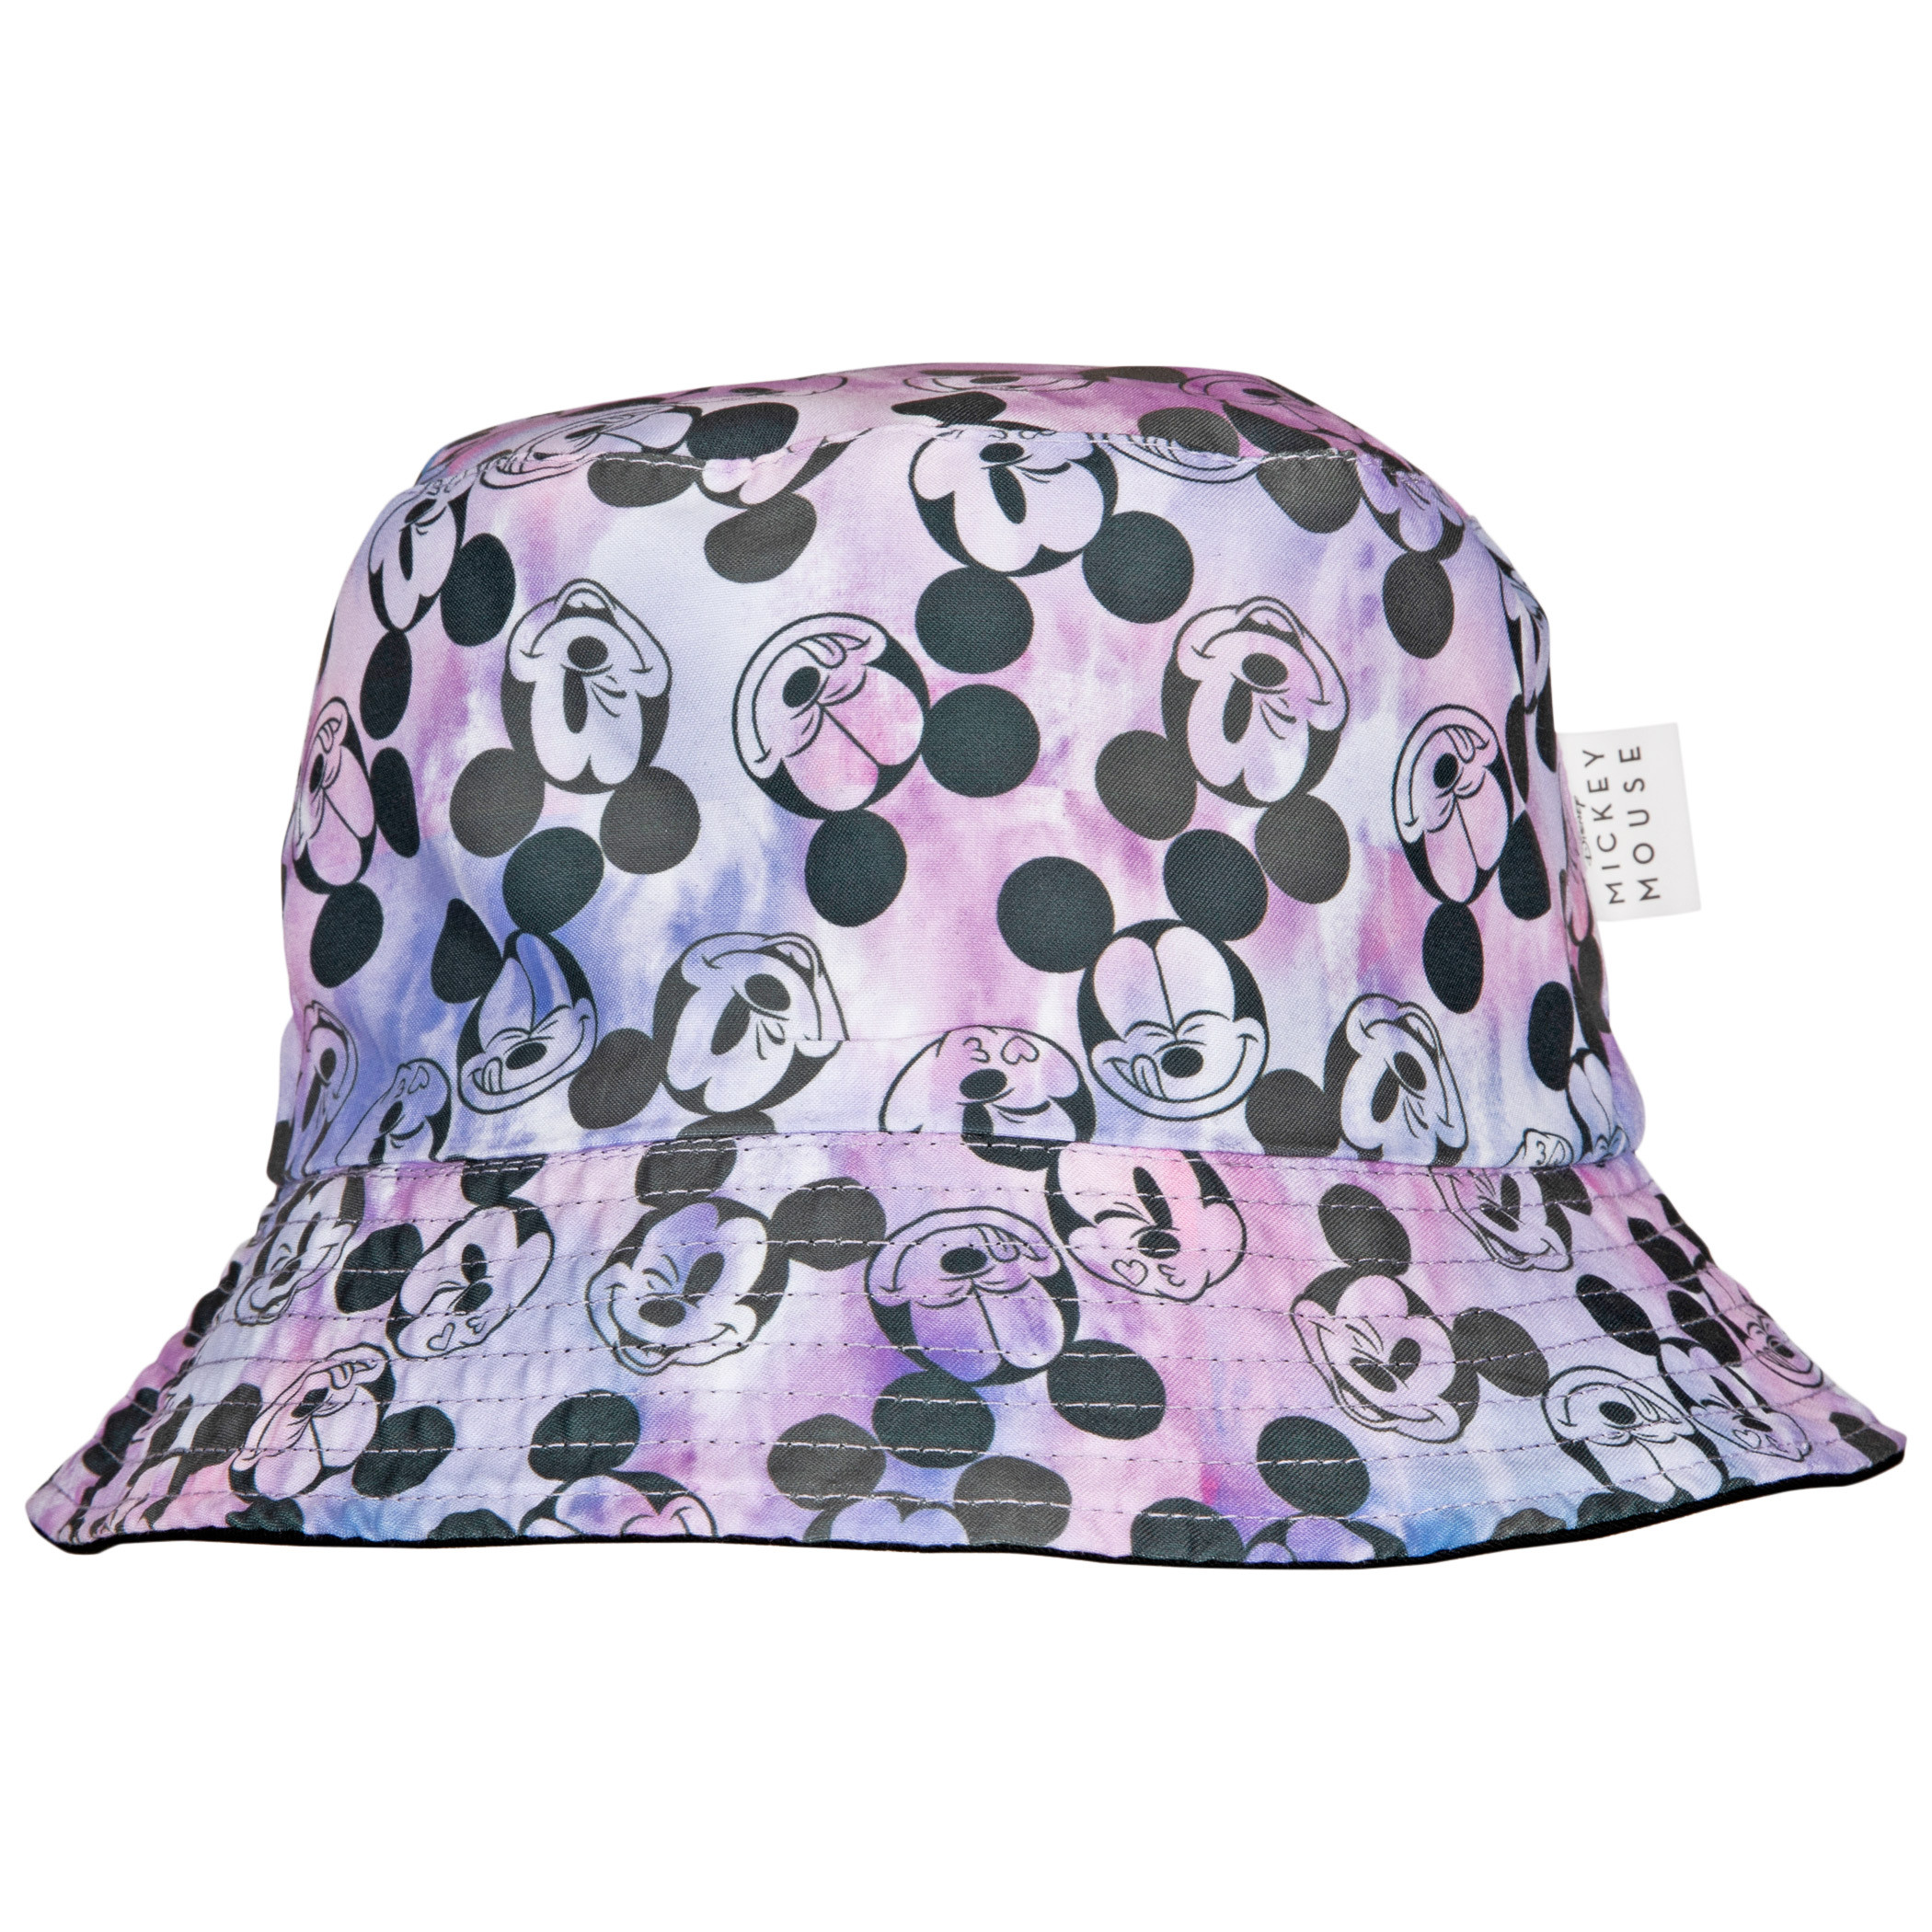 Disney Mickey Mouse Sitting and All Over Faces Reversible Bucket Hat